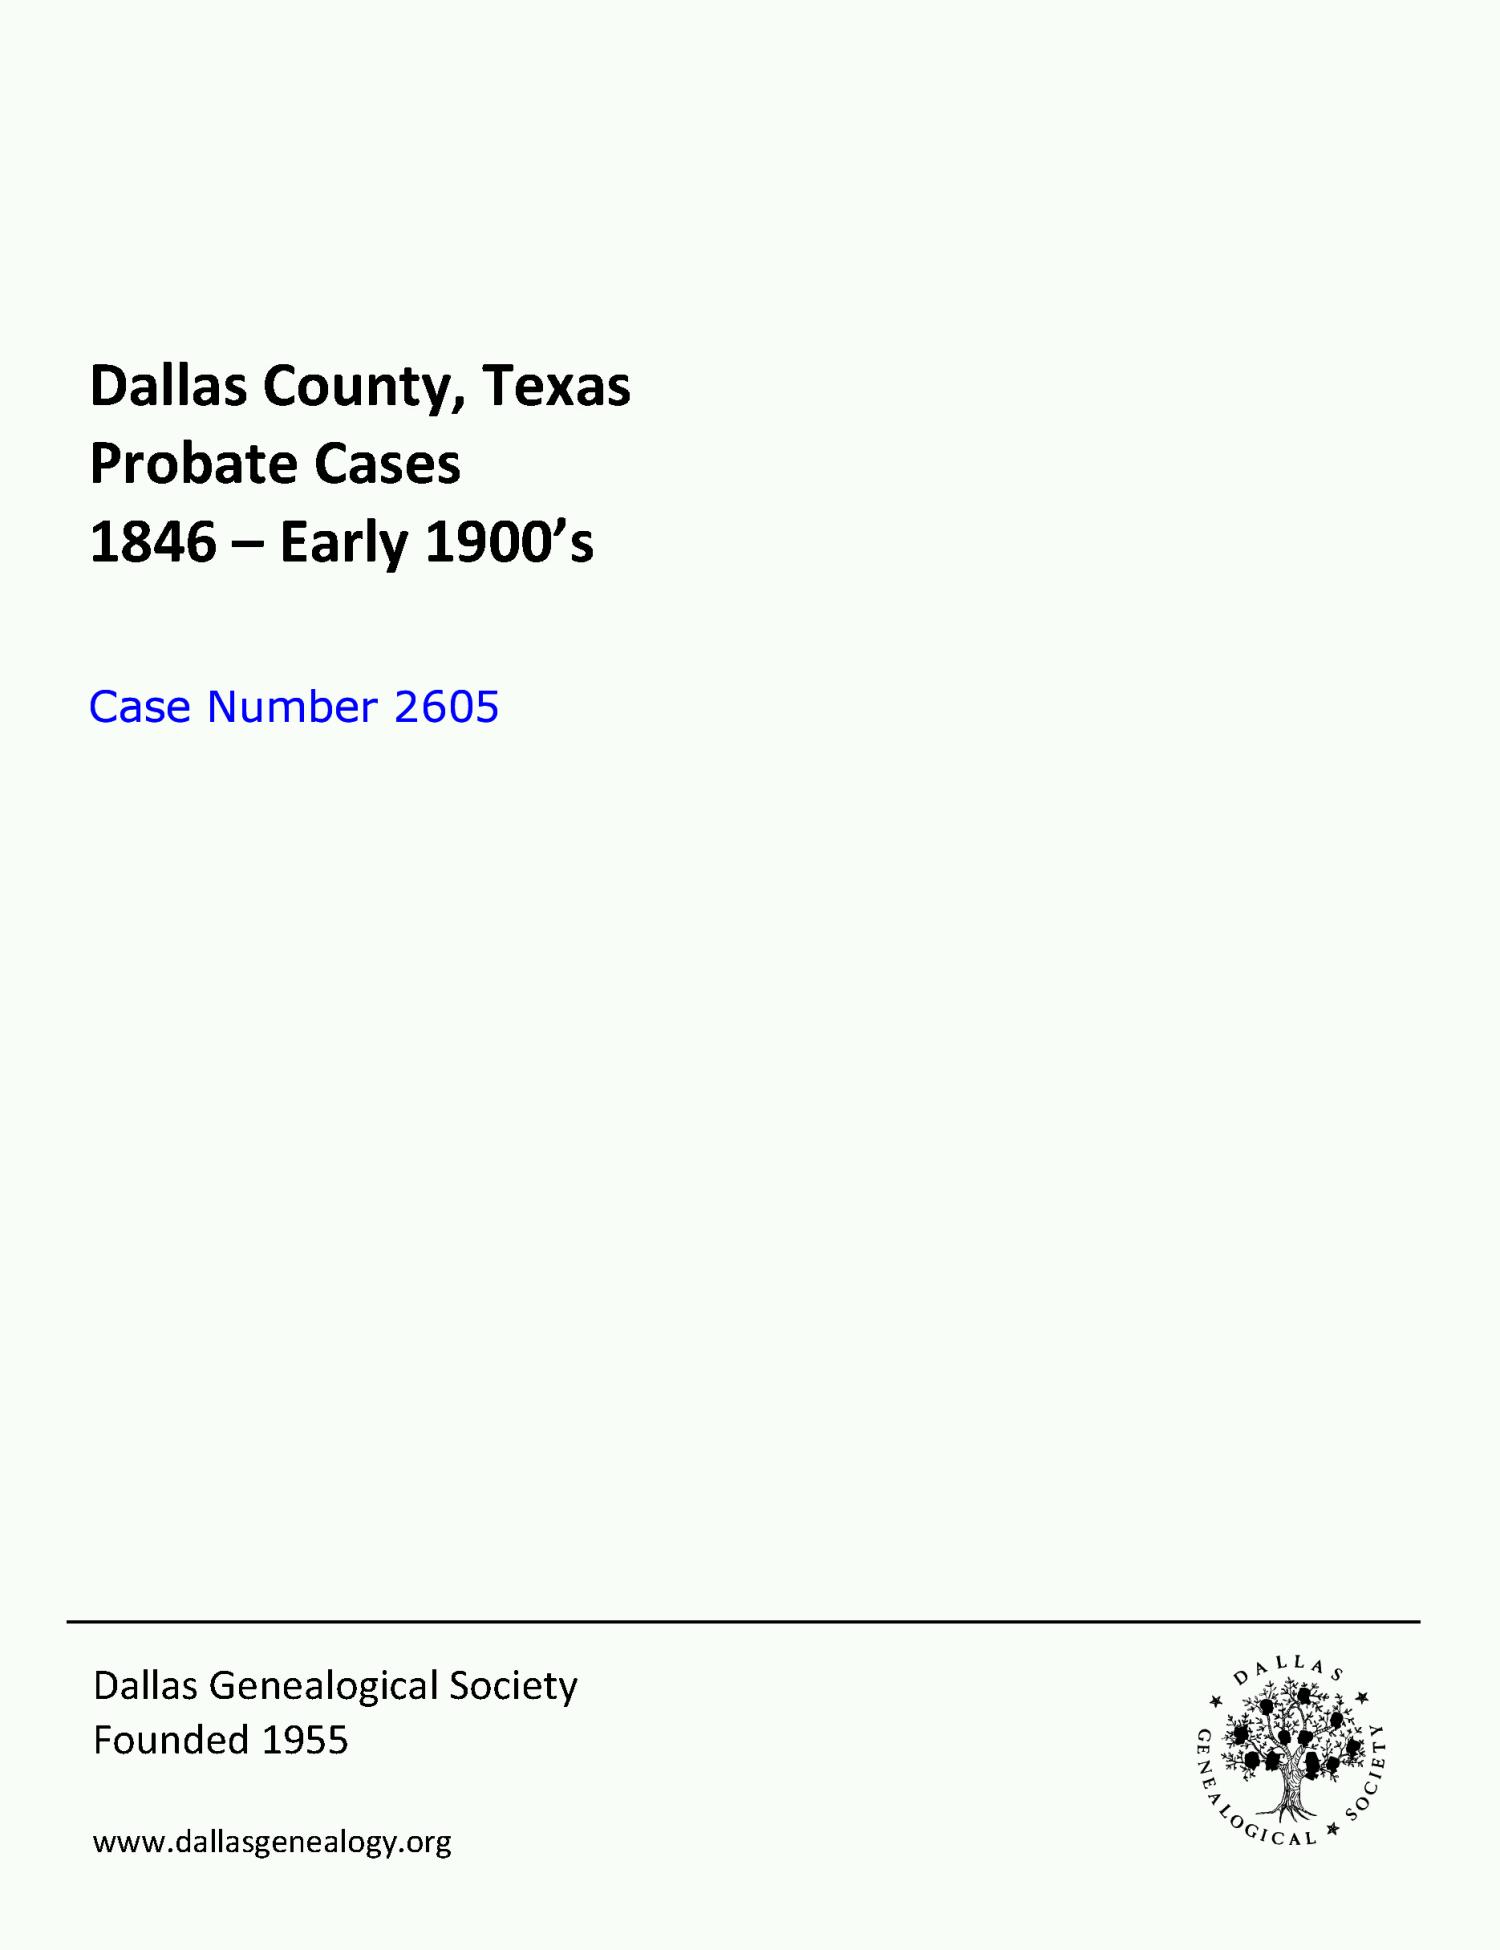 Dallas County Probate Case 2605: Obenchain, A.T. (Deceased)
                                                
                                                    [Sequence #]: 1 of 55
                                                